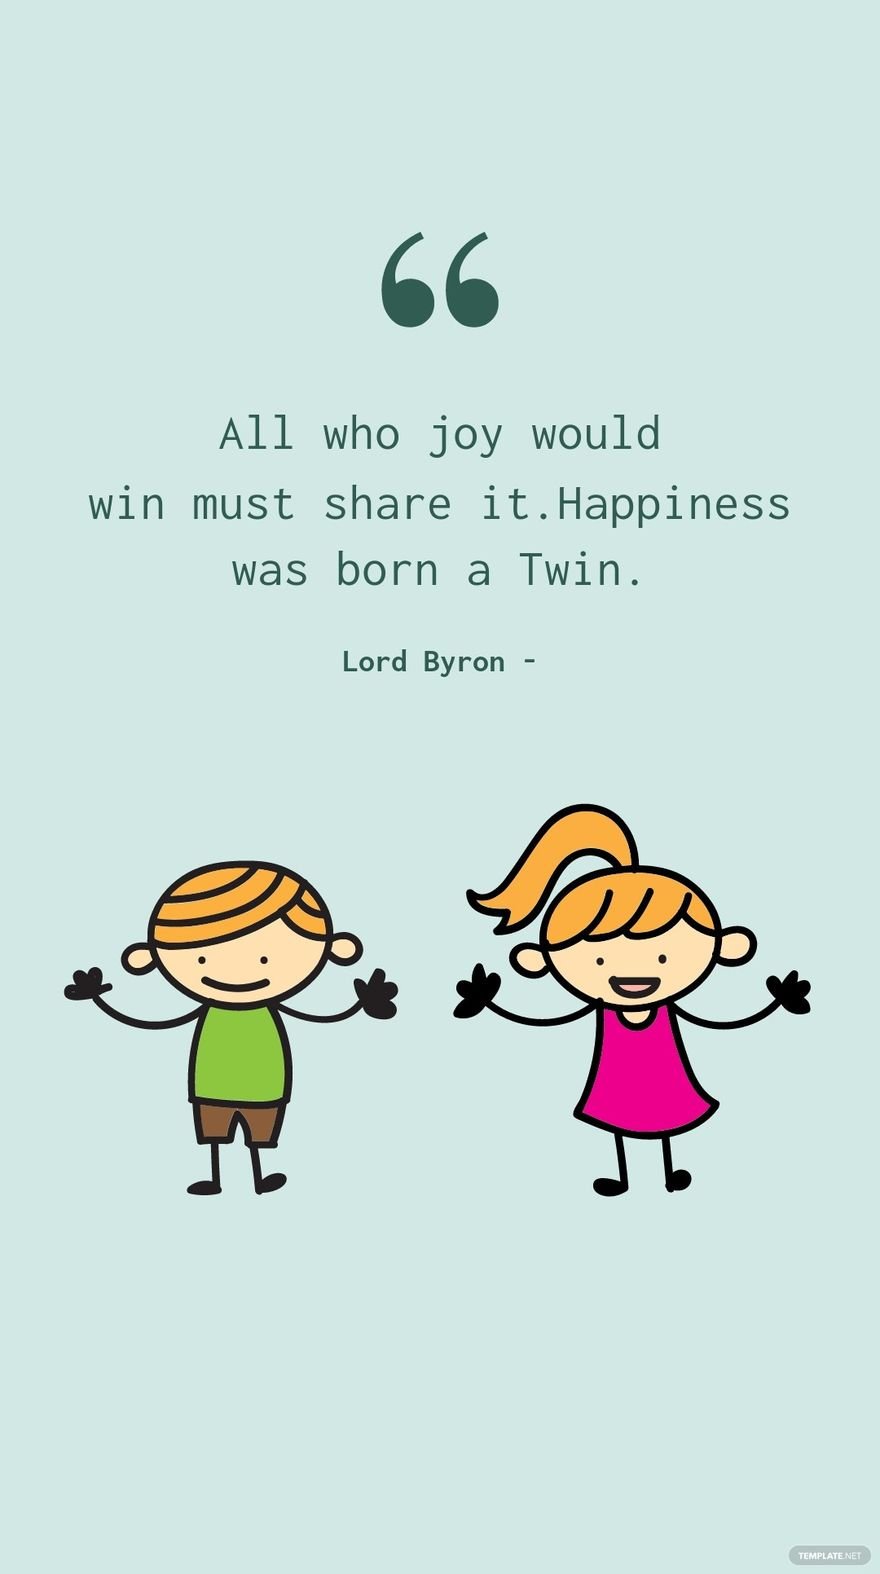 Lord Byron - All who joy would win must share it. Happiness was born a Twin. in JPG